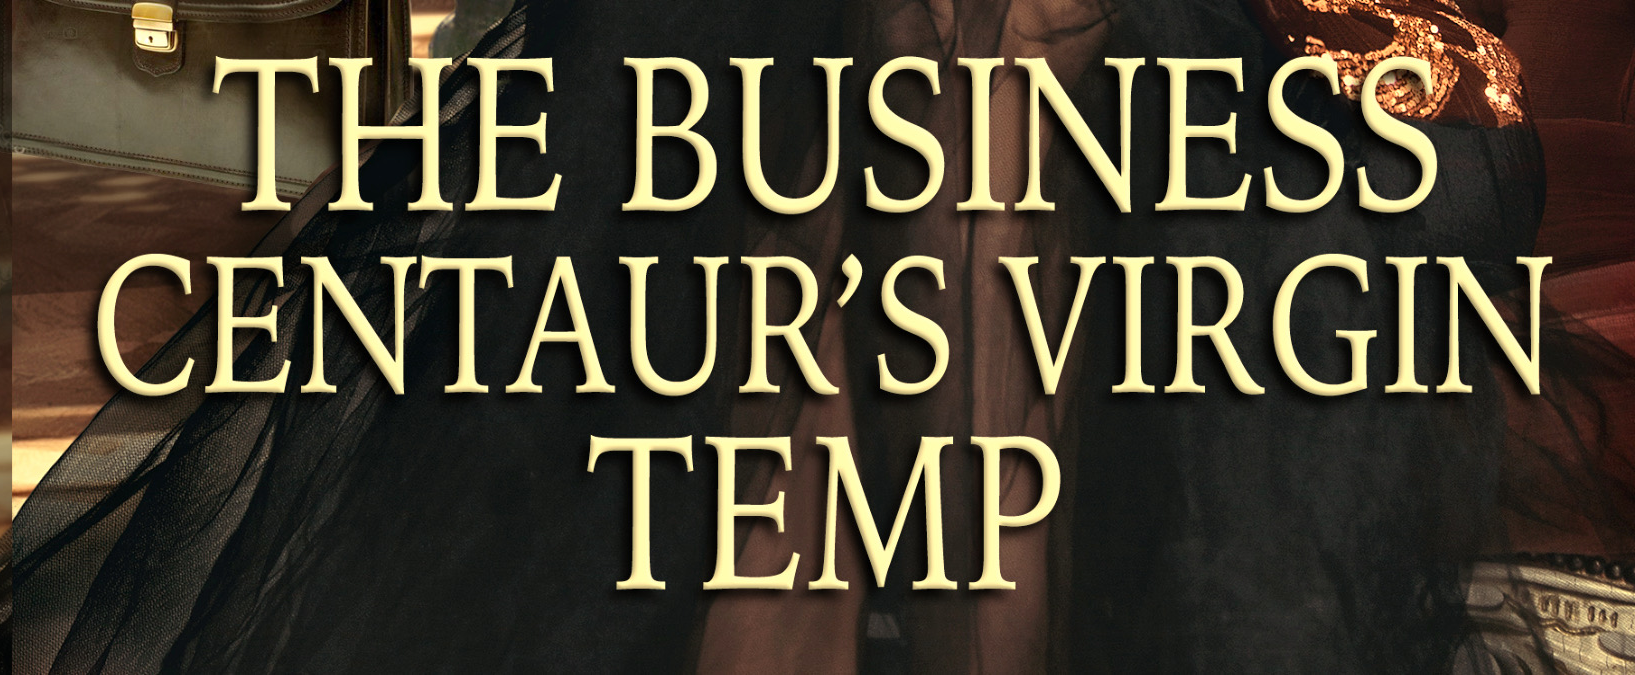 A slice of a book cover with the title "The Business Centaur's Virgin Temp"